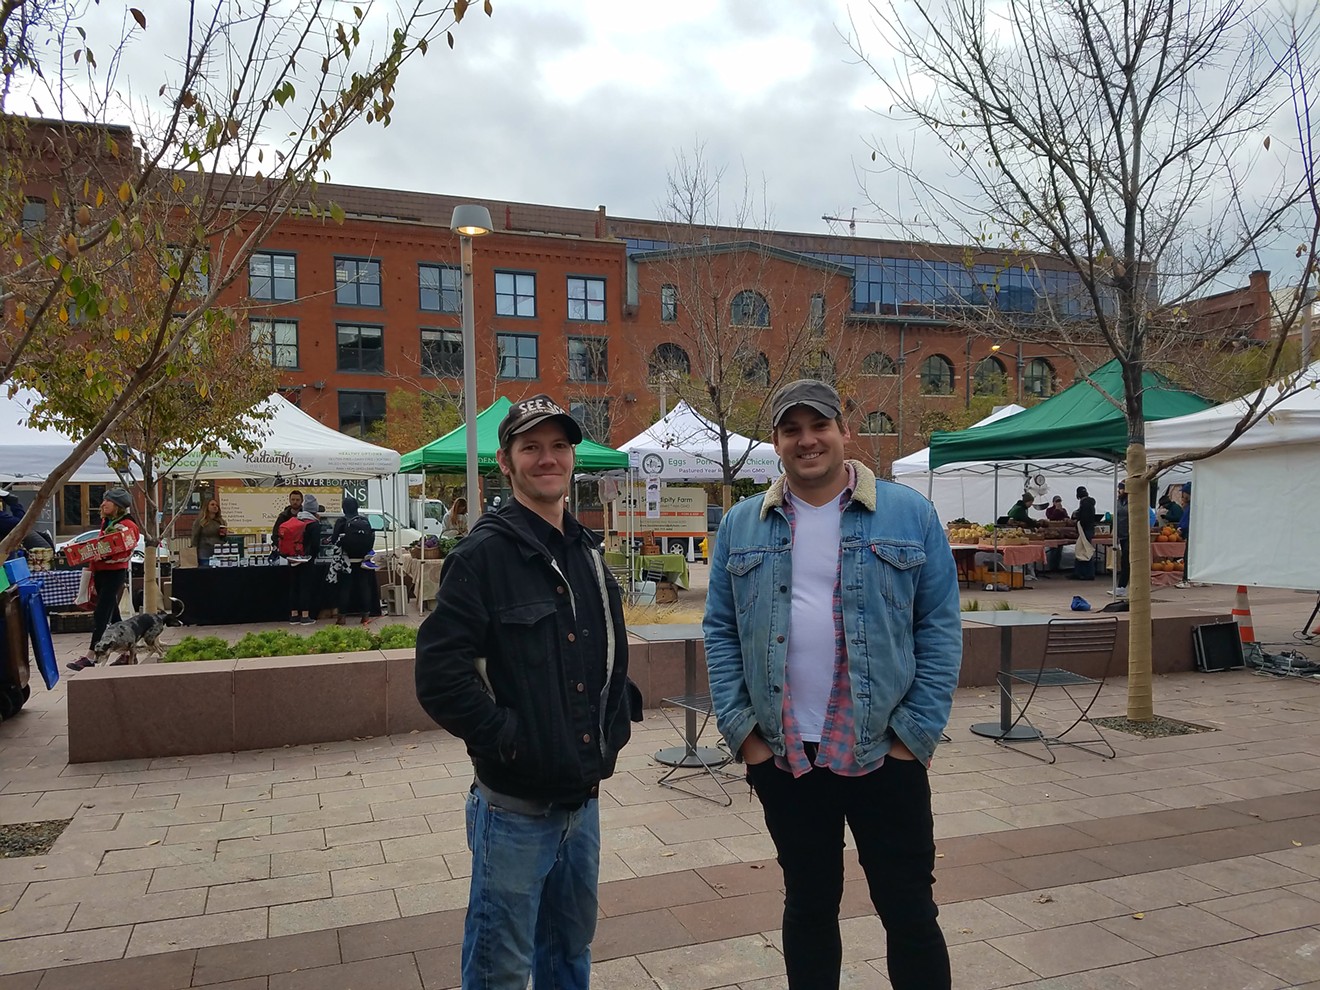 Chef Adam Branz (right) joined us with his sous, Quinn Polsinelli (left) at the last Union Station Farmers' Market of the season. The chefs will be opening up Ultreia in the station come November.